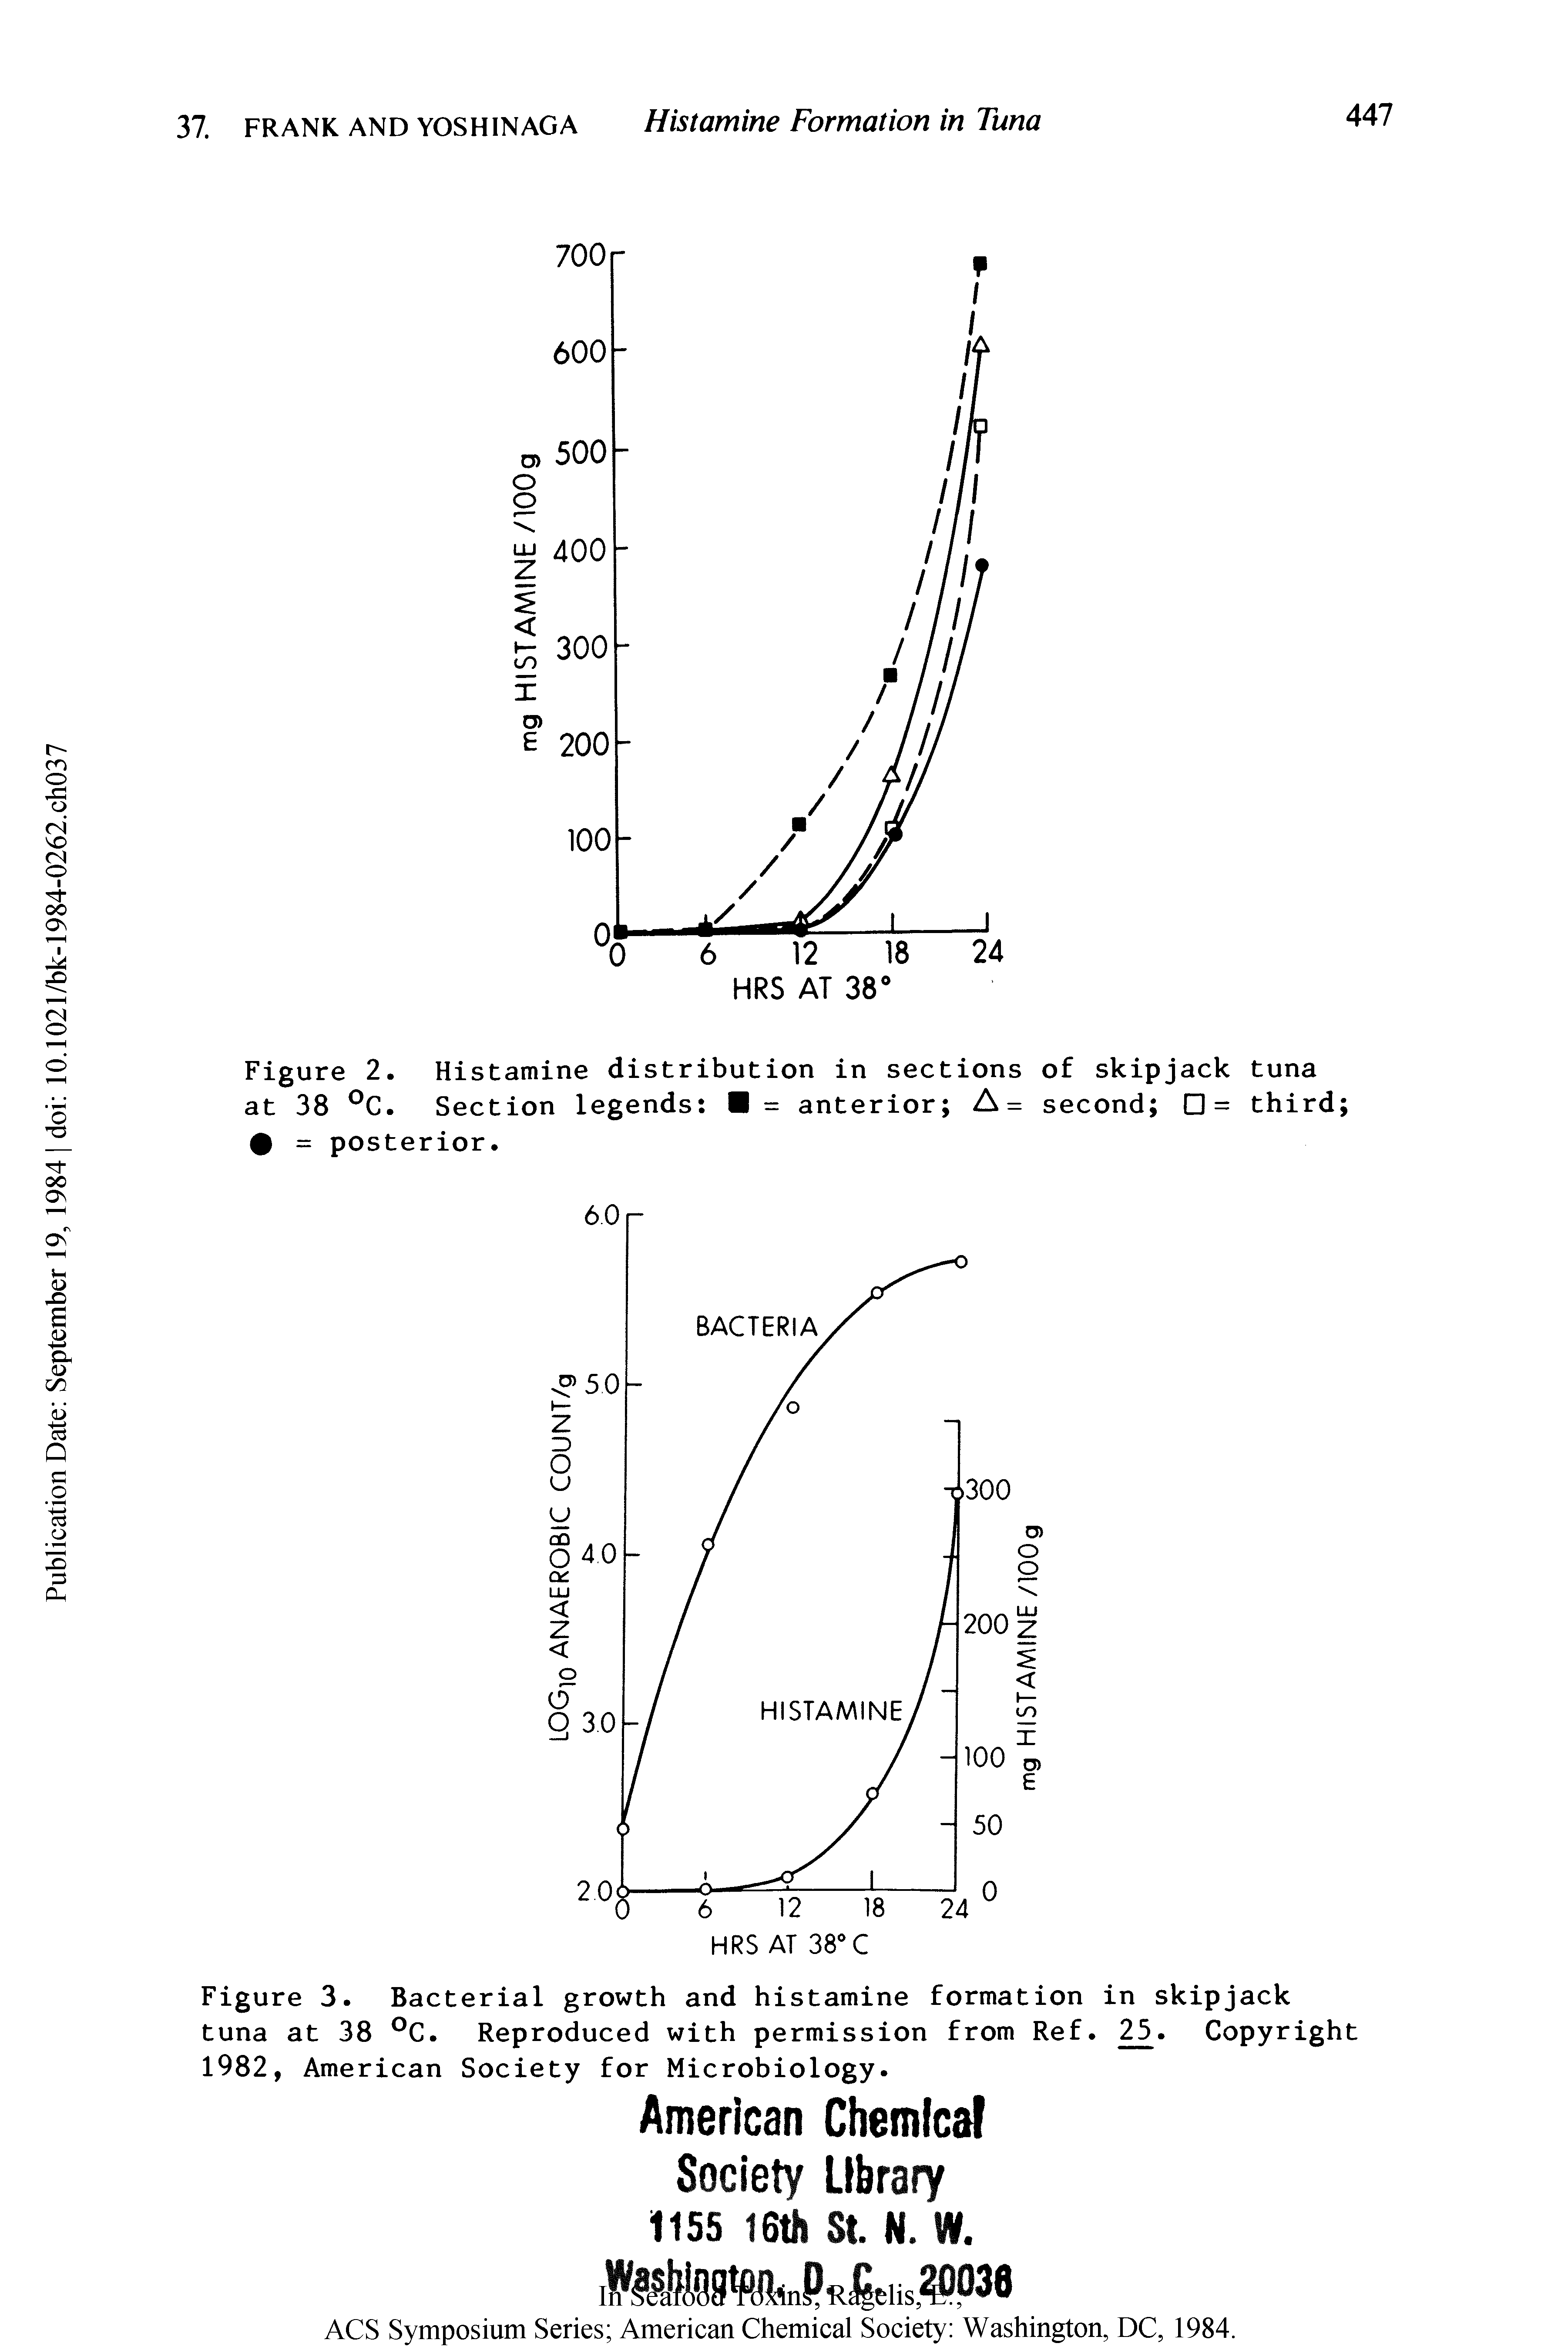 Figure 2. Histamine distribution in sections of skipjack tuna at 38 C. Section legends = anterior A= second = third = posterior.